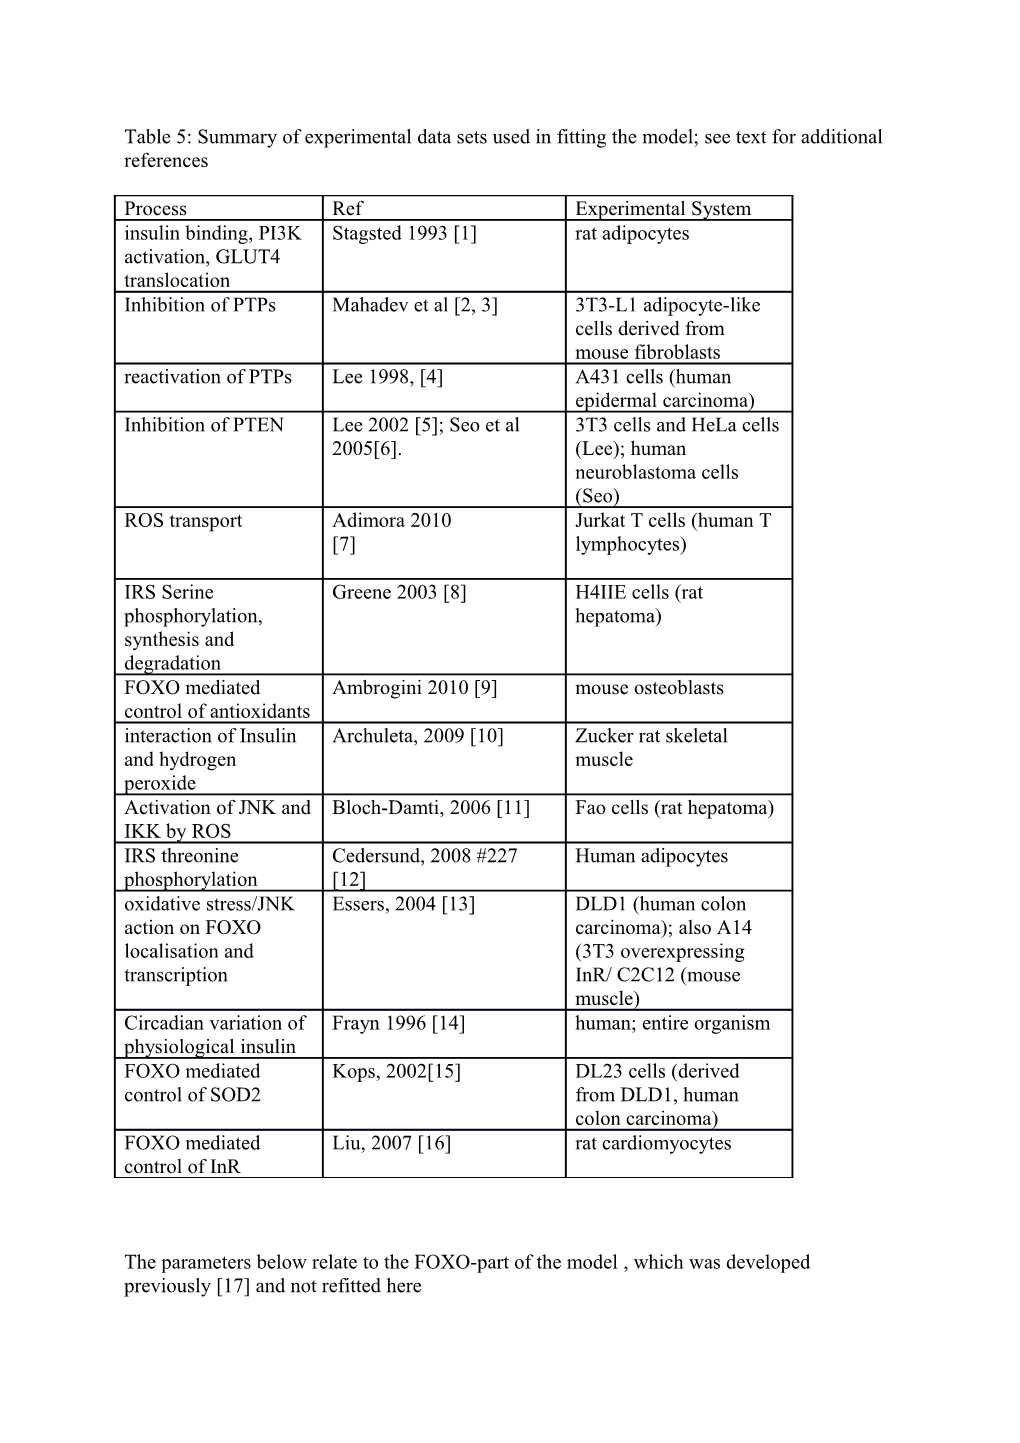 Table 5: Summary of Experimental Data Sets Used in Fitting the Model; See Text for Additional